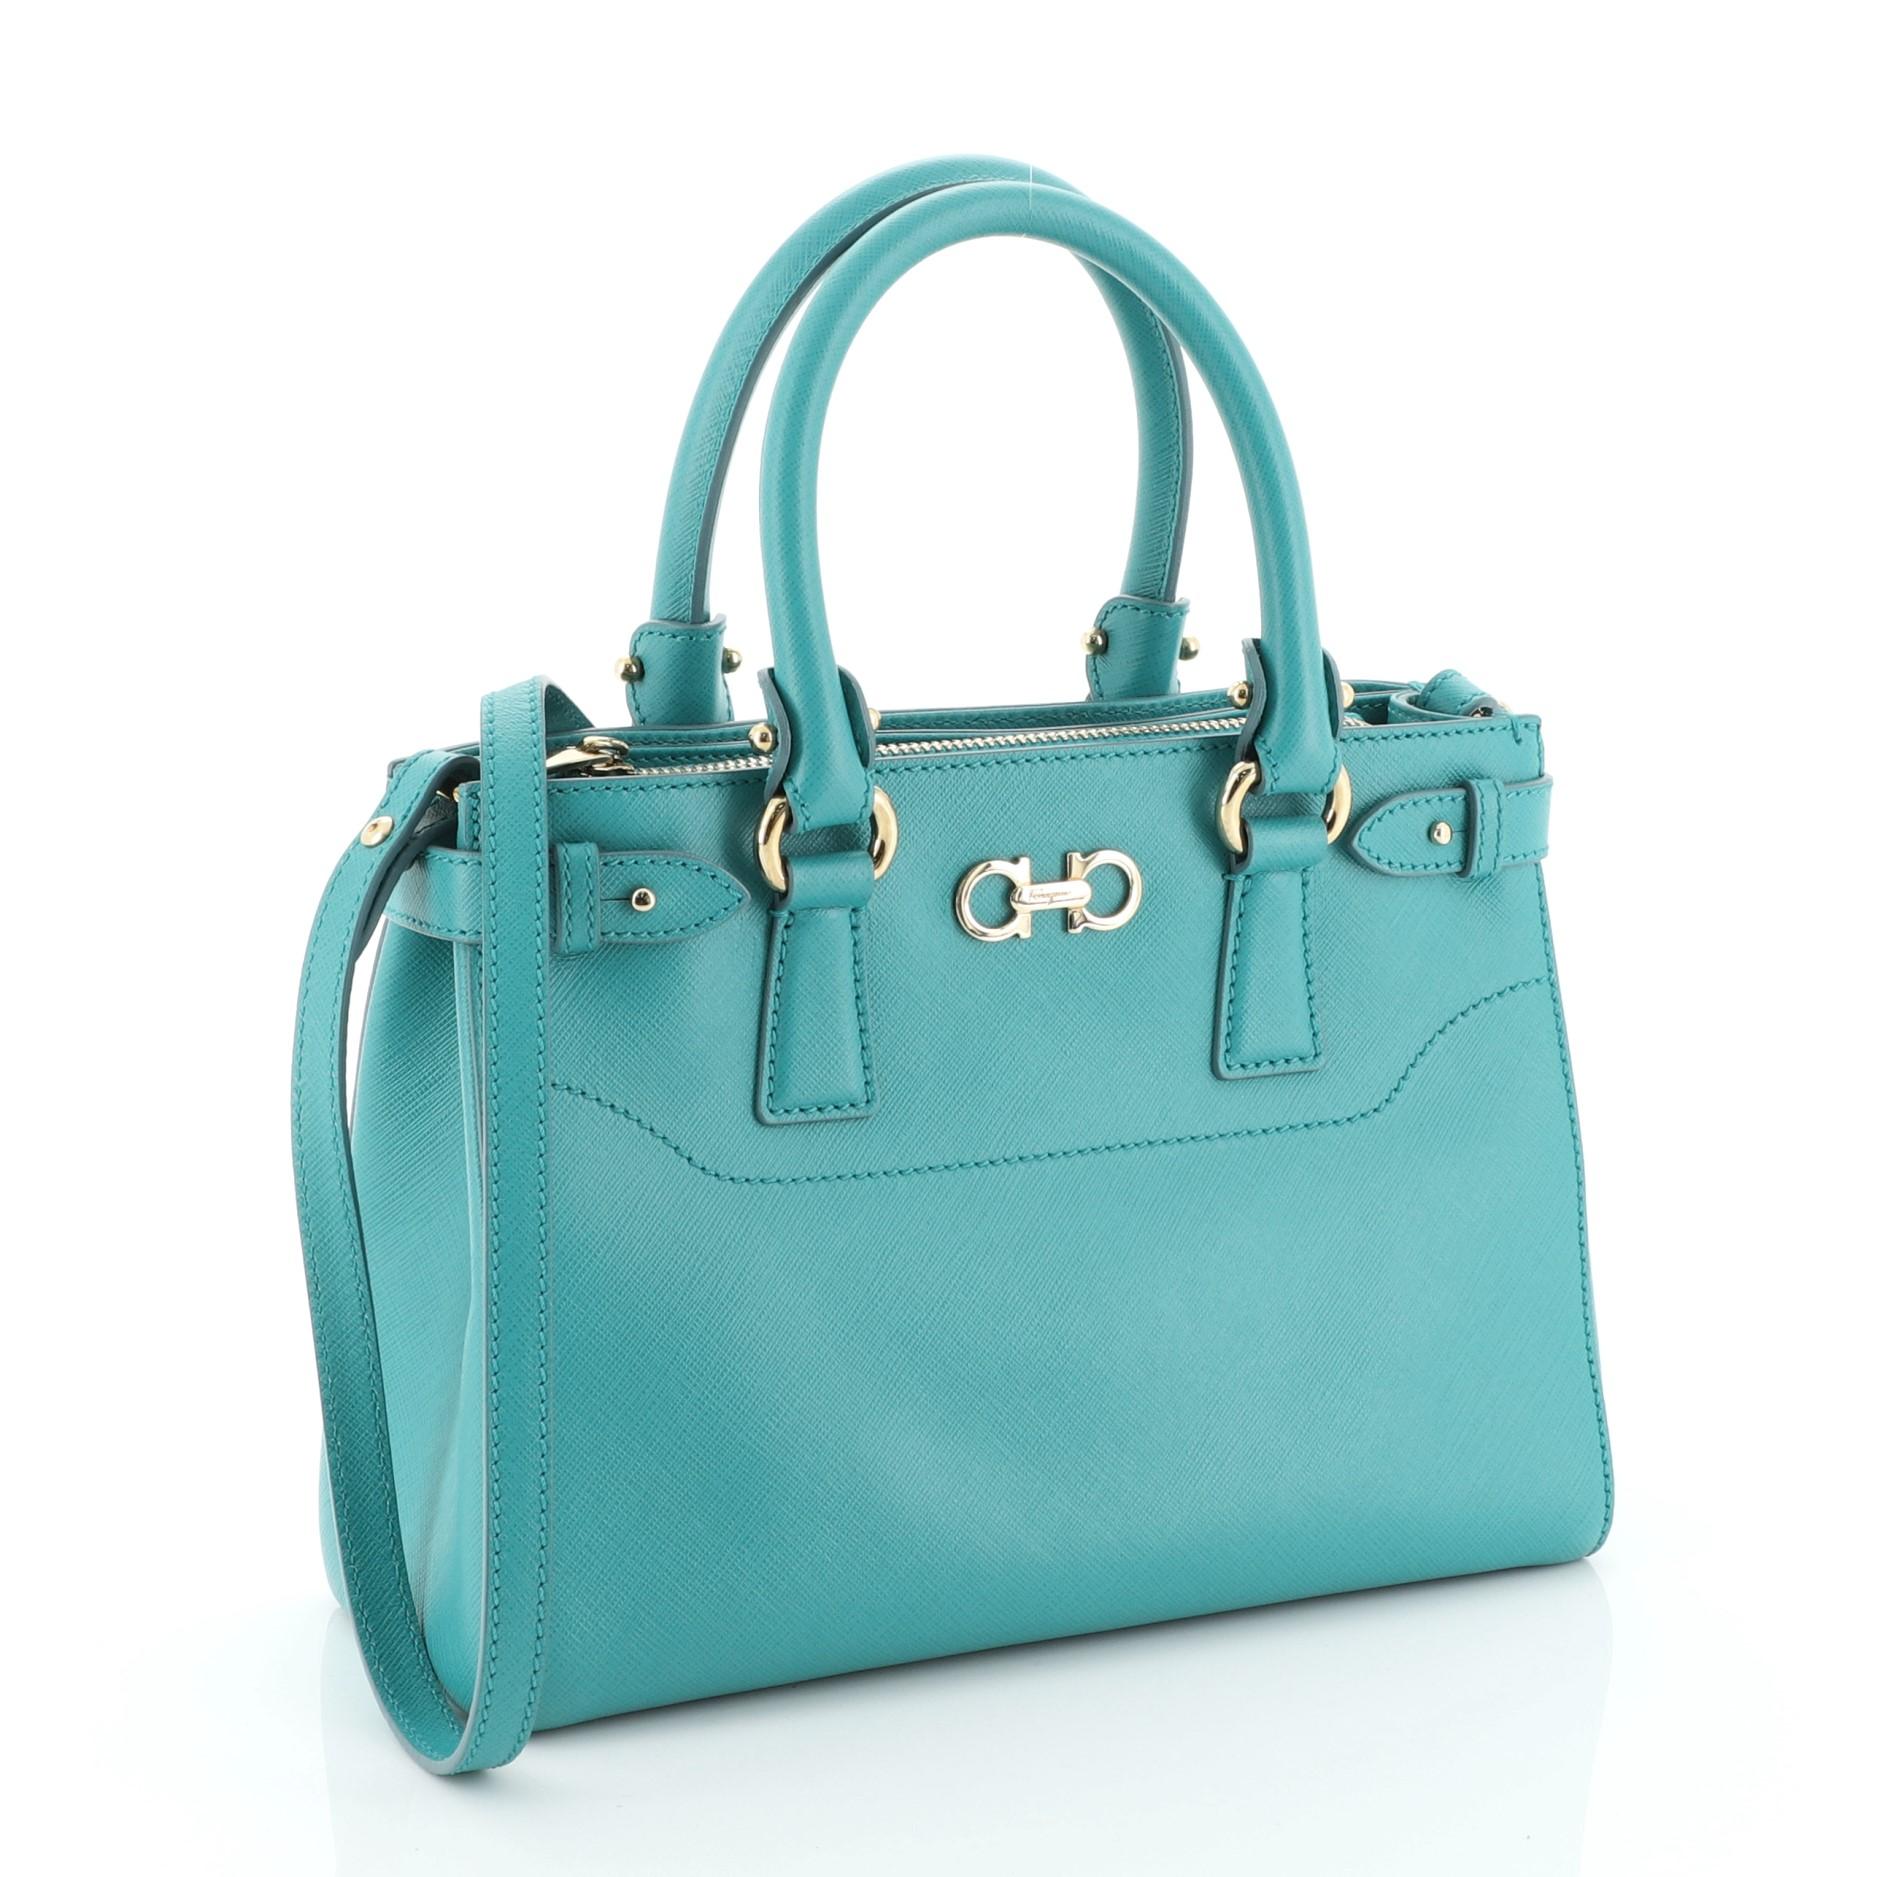 This Salvatore Ferragamo Beky Handbag Saffiano Leather Small, crafted from green saffiano leather, features dual-rolled leather handles, signature Gancini detail at top center, tonal topstitching detail, two exterior side compartments, side snap